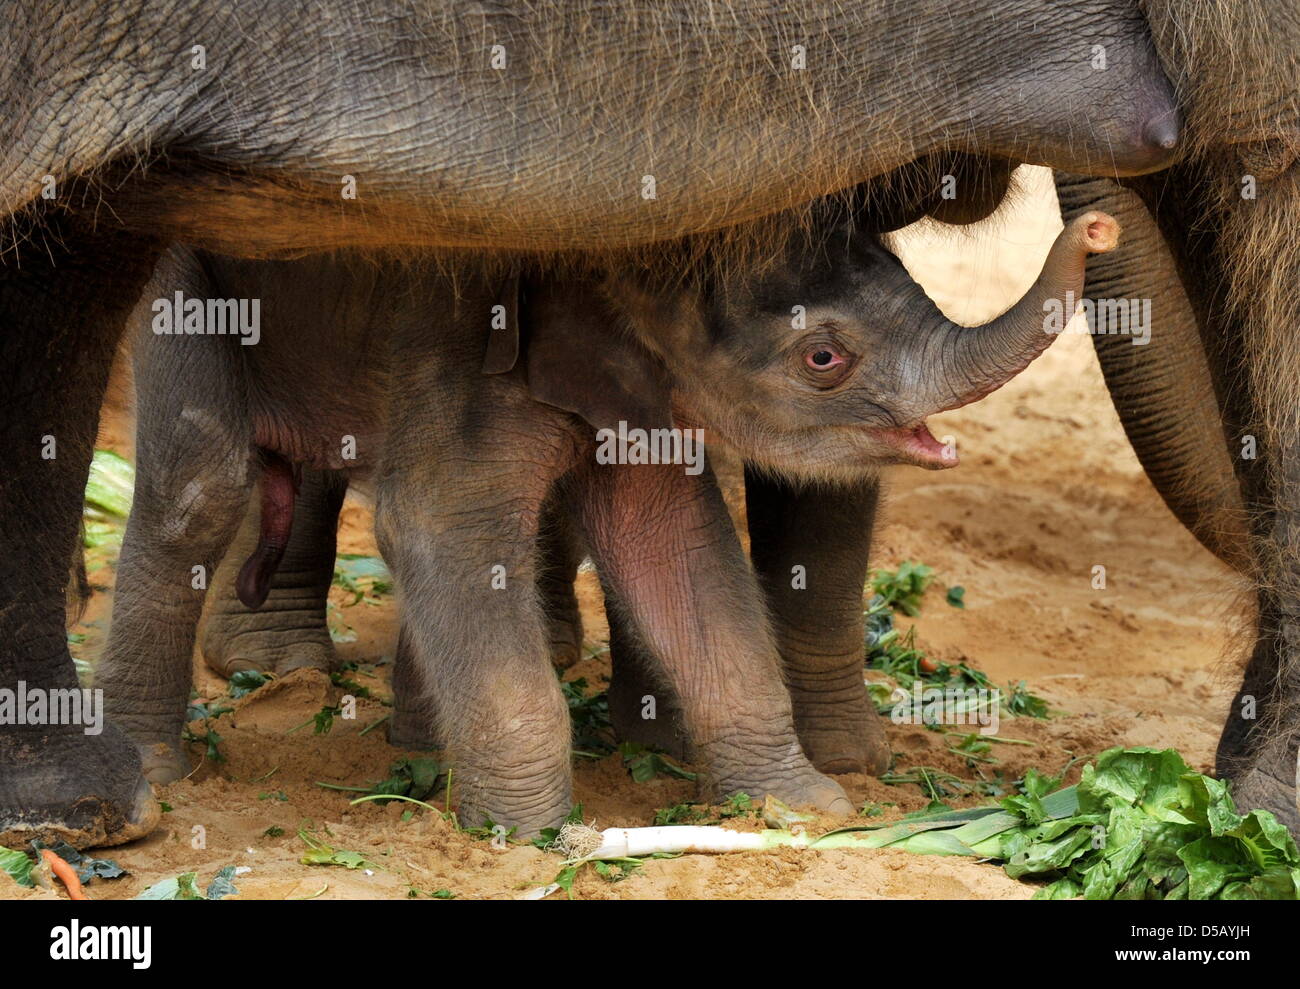 Protected by its mother Califa, the yet unnamed new baby elephant explores the grounds at the zoo iN Hanover, Germany, 27 July 2010. It is the third baby elephant after Saphira (born 07 May 2010) and Nuka (born 11 May 2010) this year at the zoo. Photo: JOCHEN LUEBKE Stock Photo